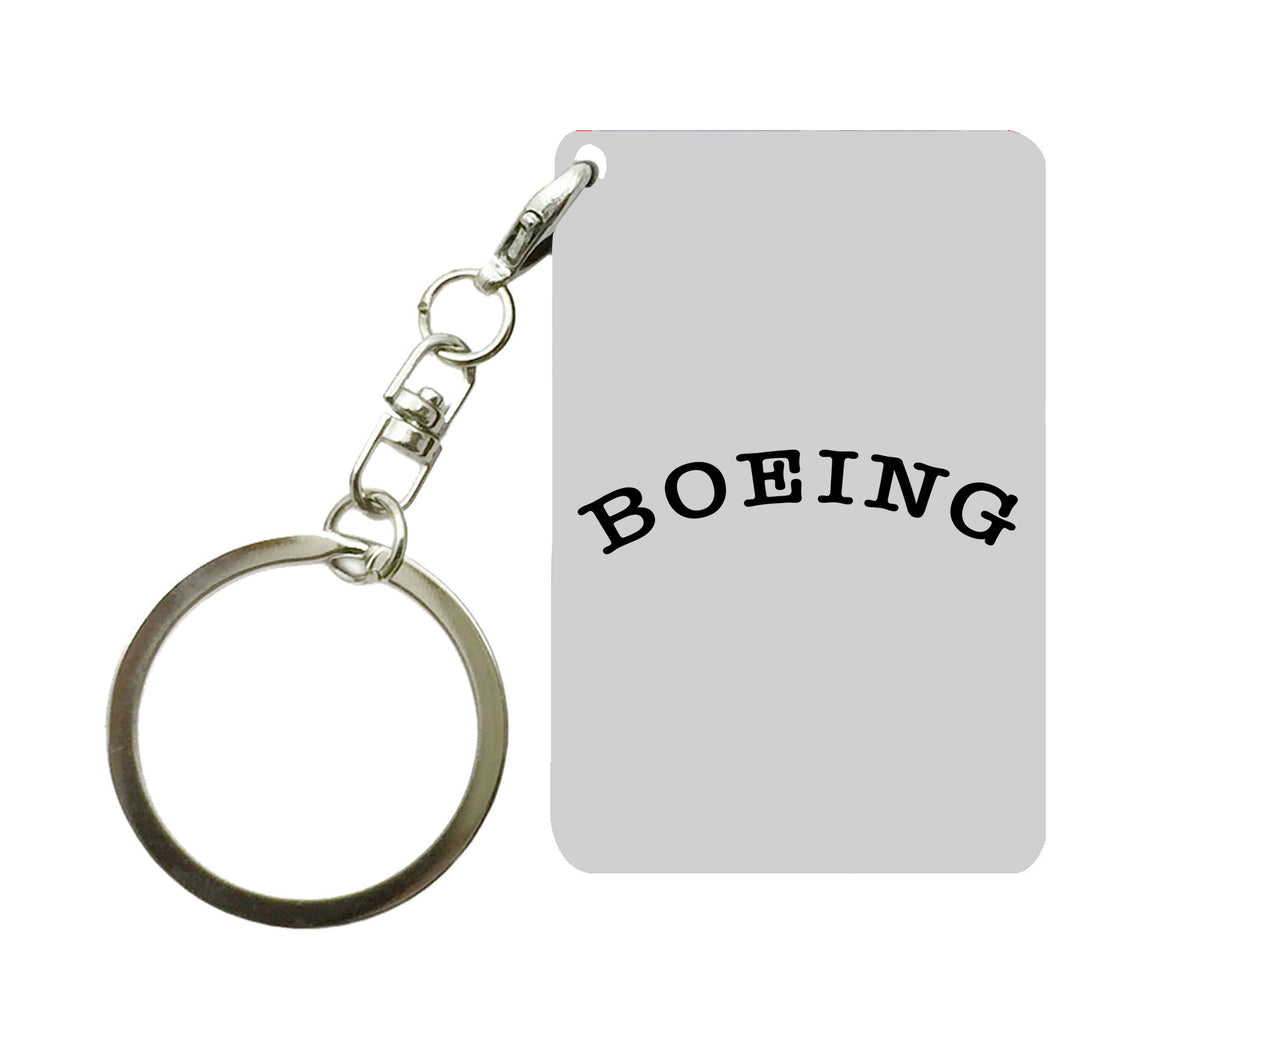 Special BOEING Text Designed Key Chains